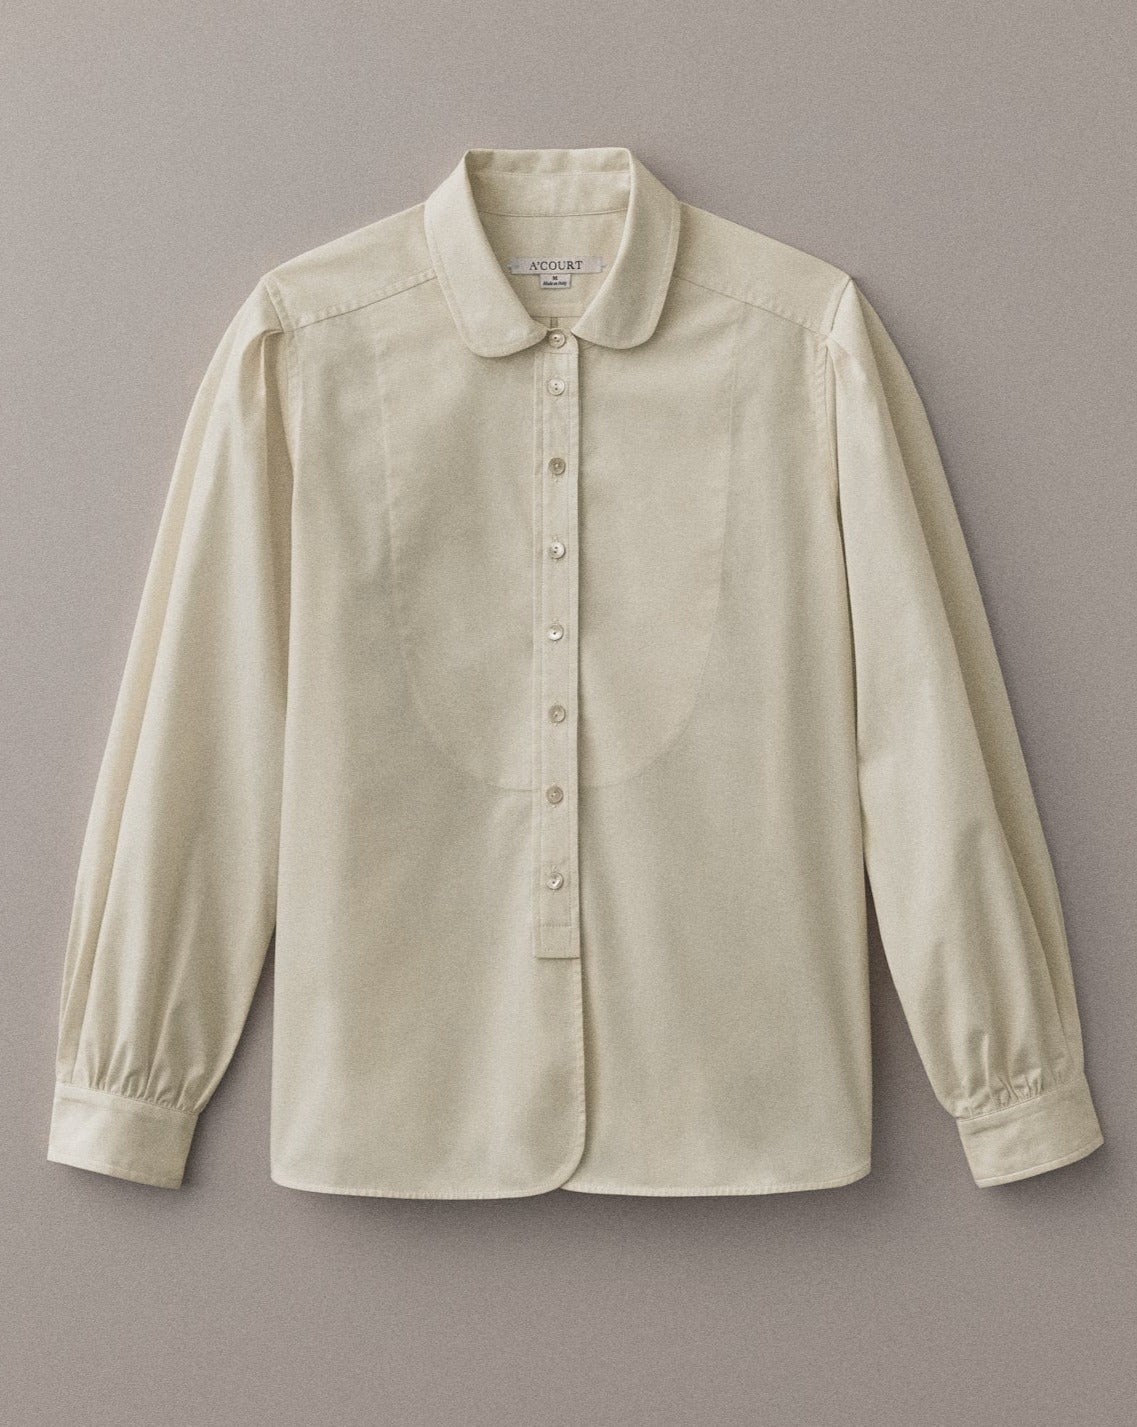 A long sleeve buttery cream button down with a classic menswear silhouette lies on a light brown field.